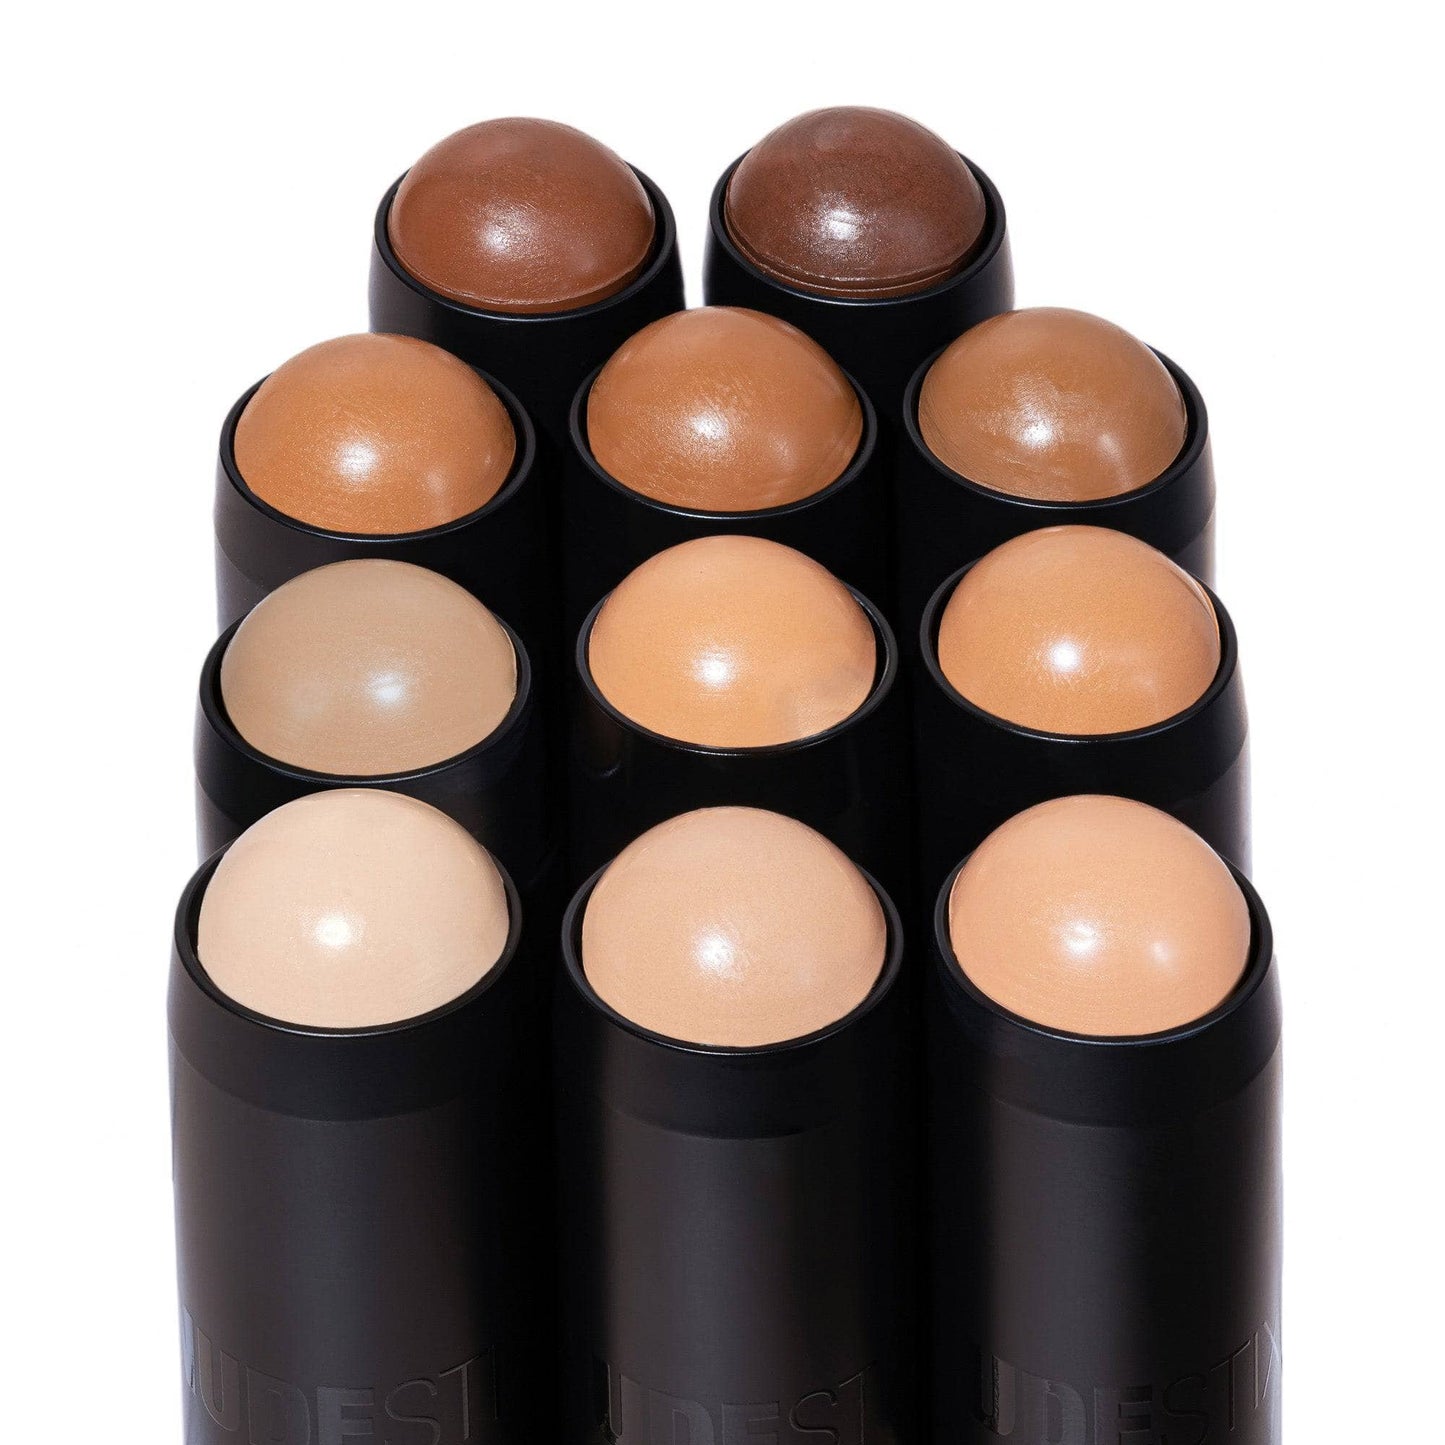 deep 9.5 standing with other Tinted Blur Foundation Stick shades